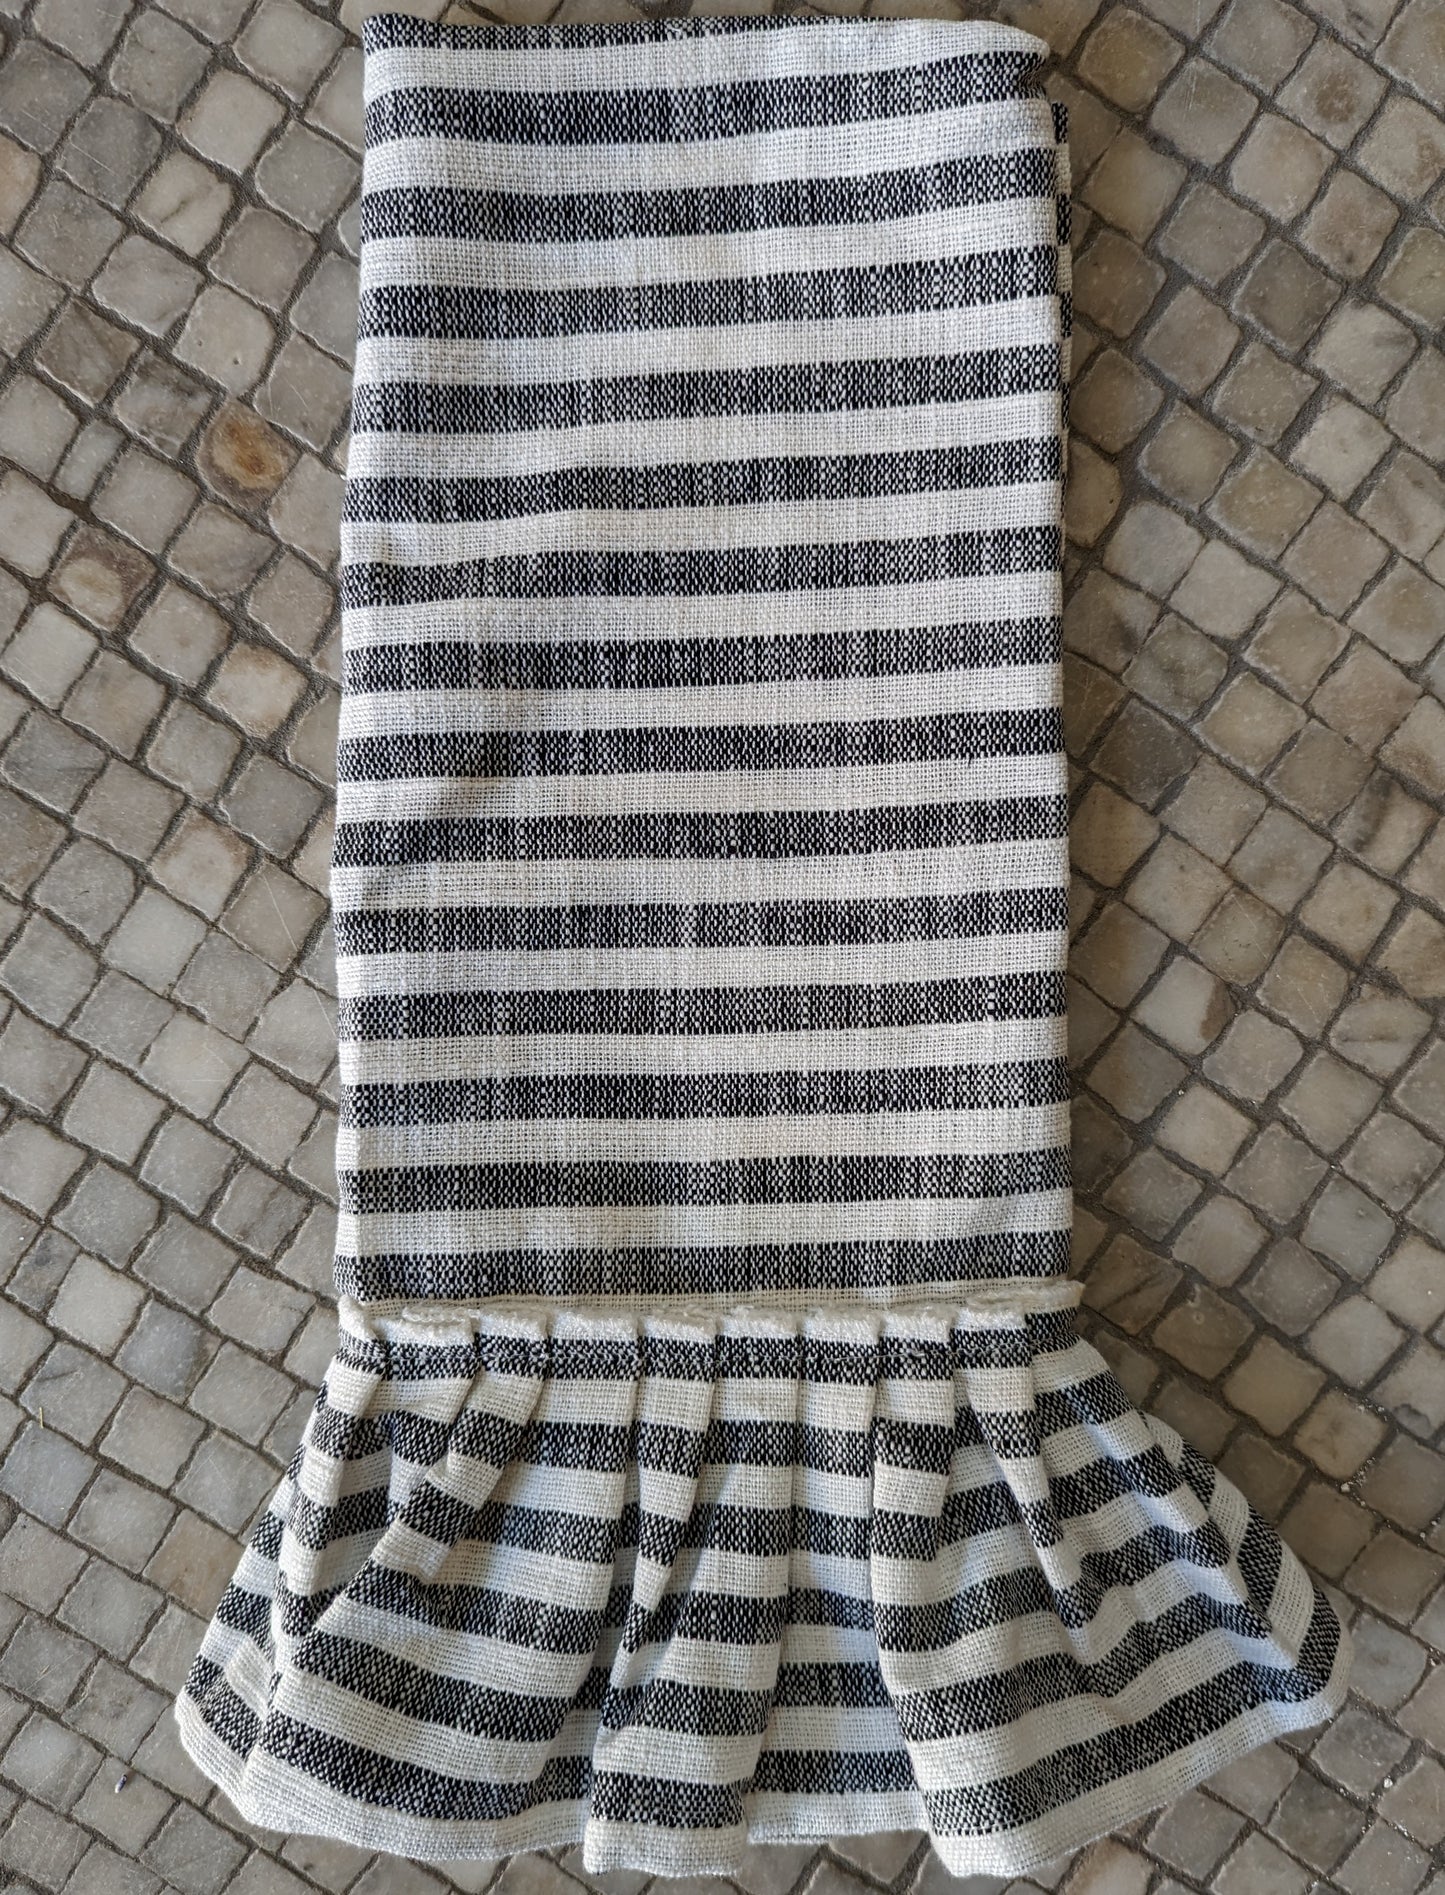 Black and White Striped Kitchen Towel and Apron